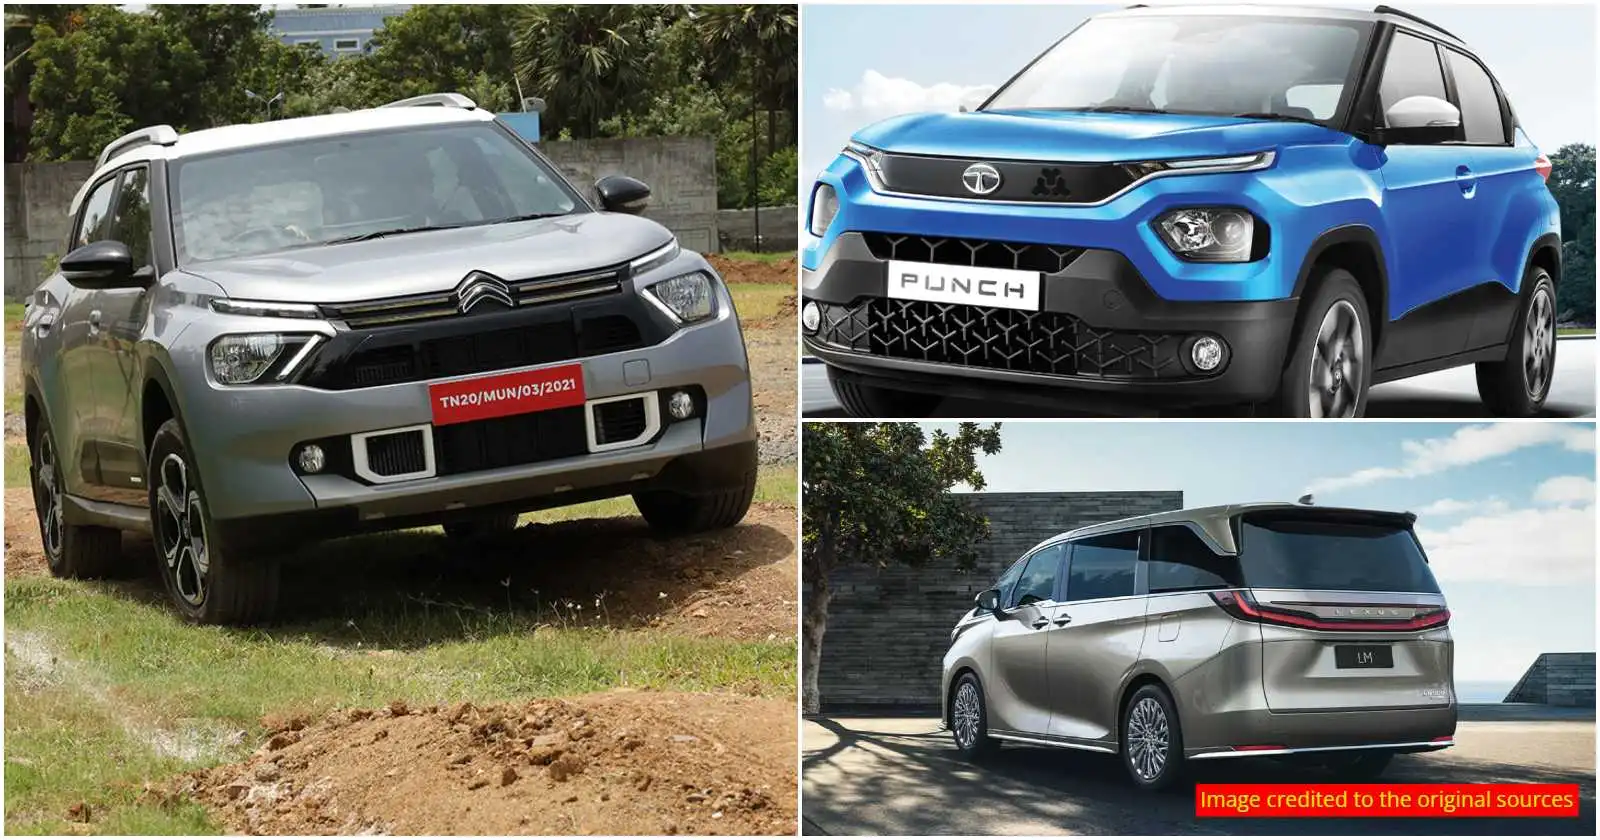 Below the Top expected cars in Indian Automobile Market- Get the Complete details of these cars.